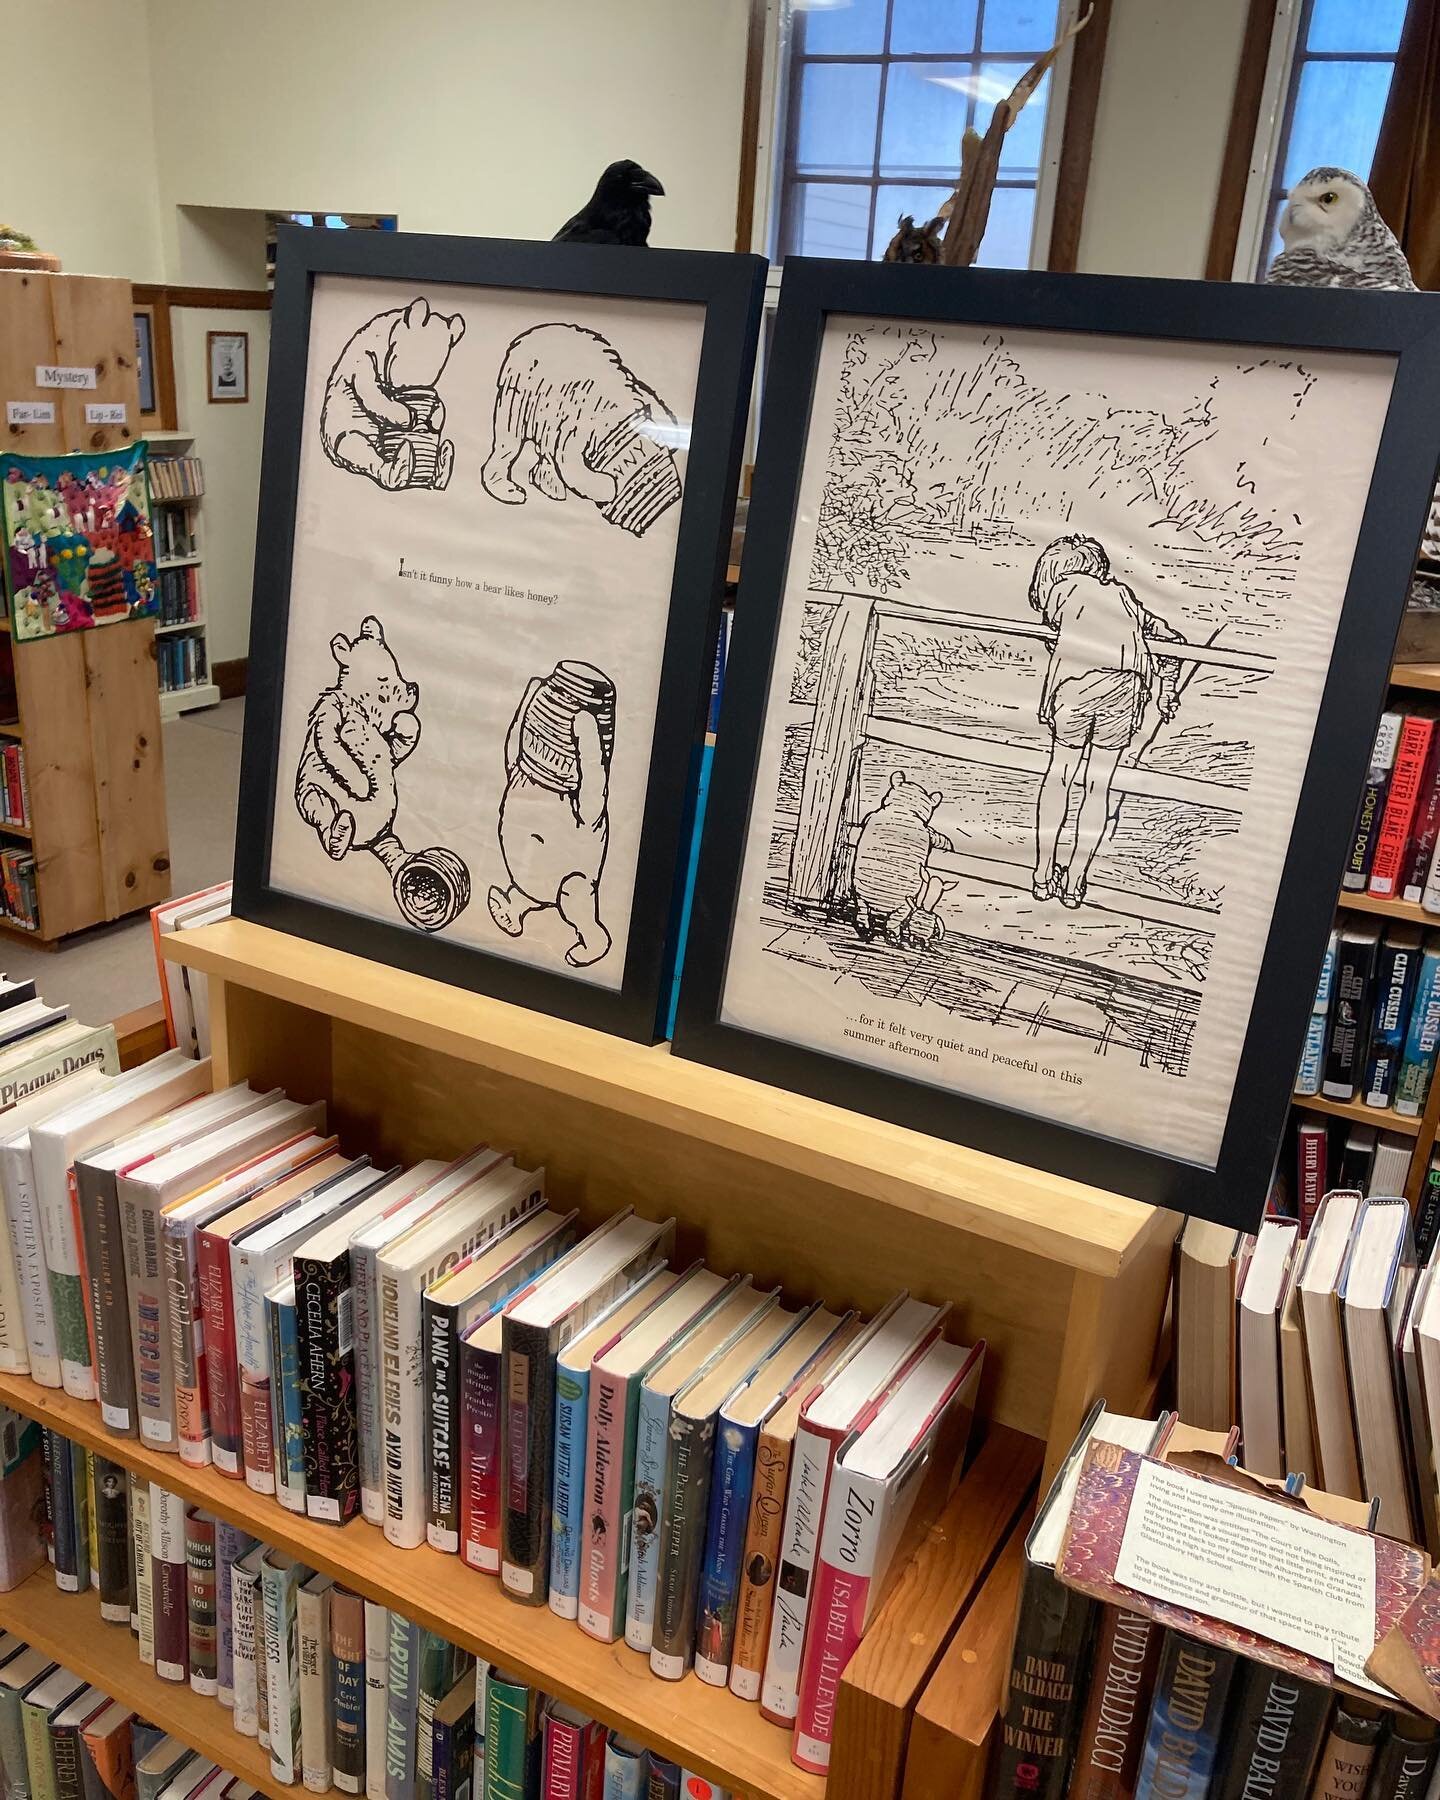 For 10 years the volunteers from the Bowdoinham Public Library have been crafting things out of old and discarded books. Again this year they will have a table at our show that they call &ldquo;Treasures from the Library Attic&rdquo; 
📖 
This year a